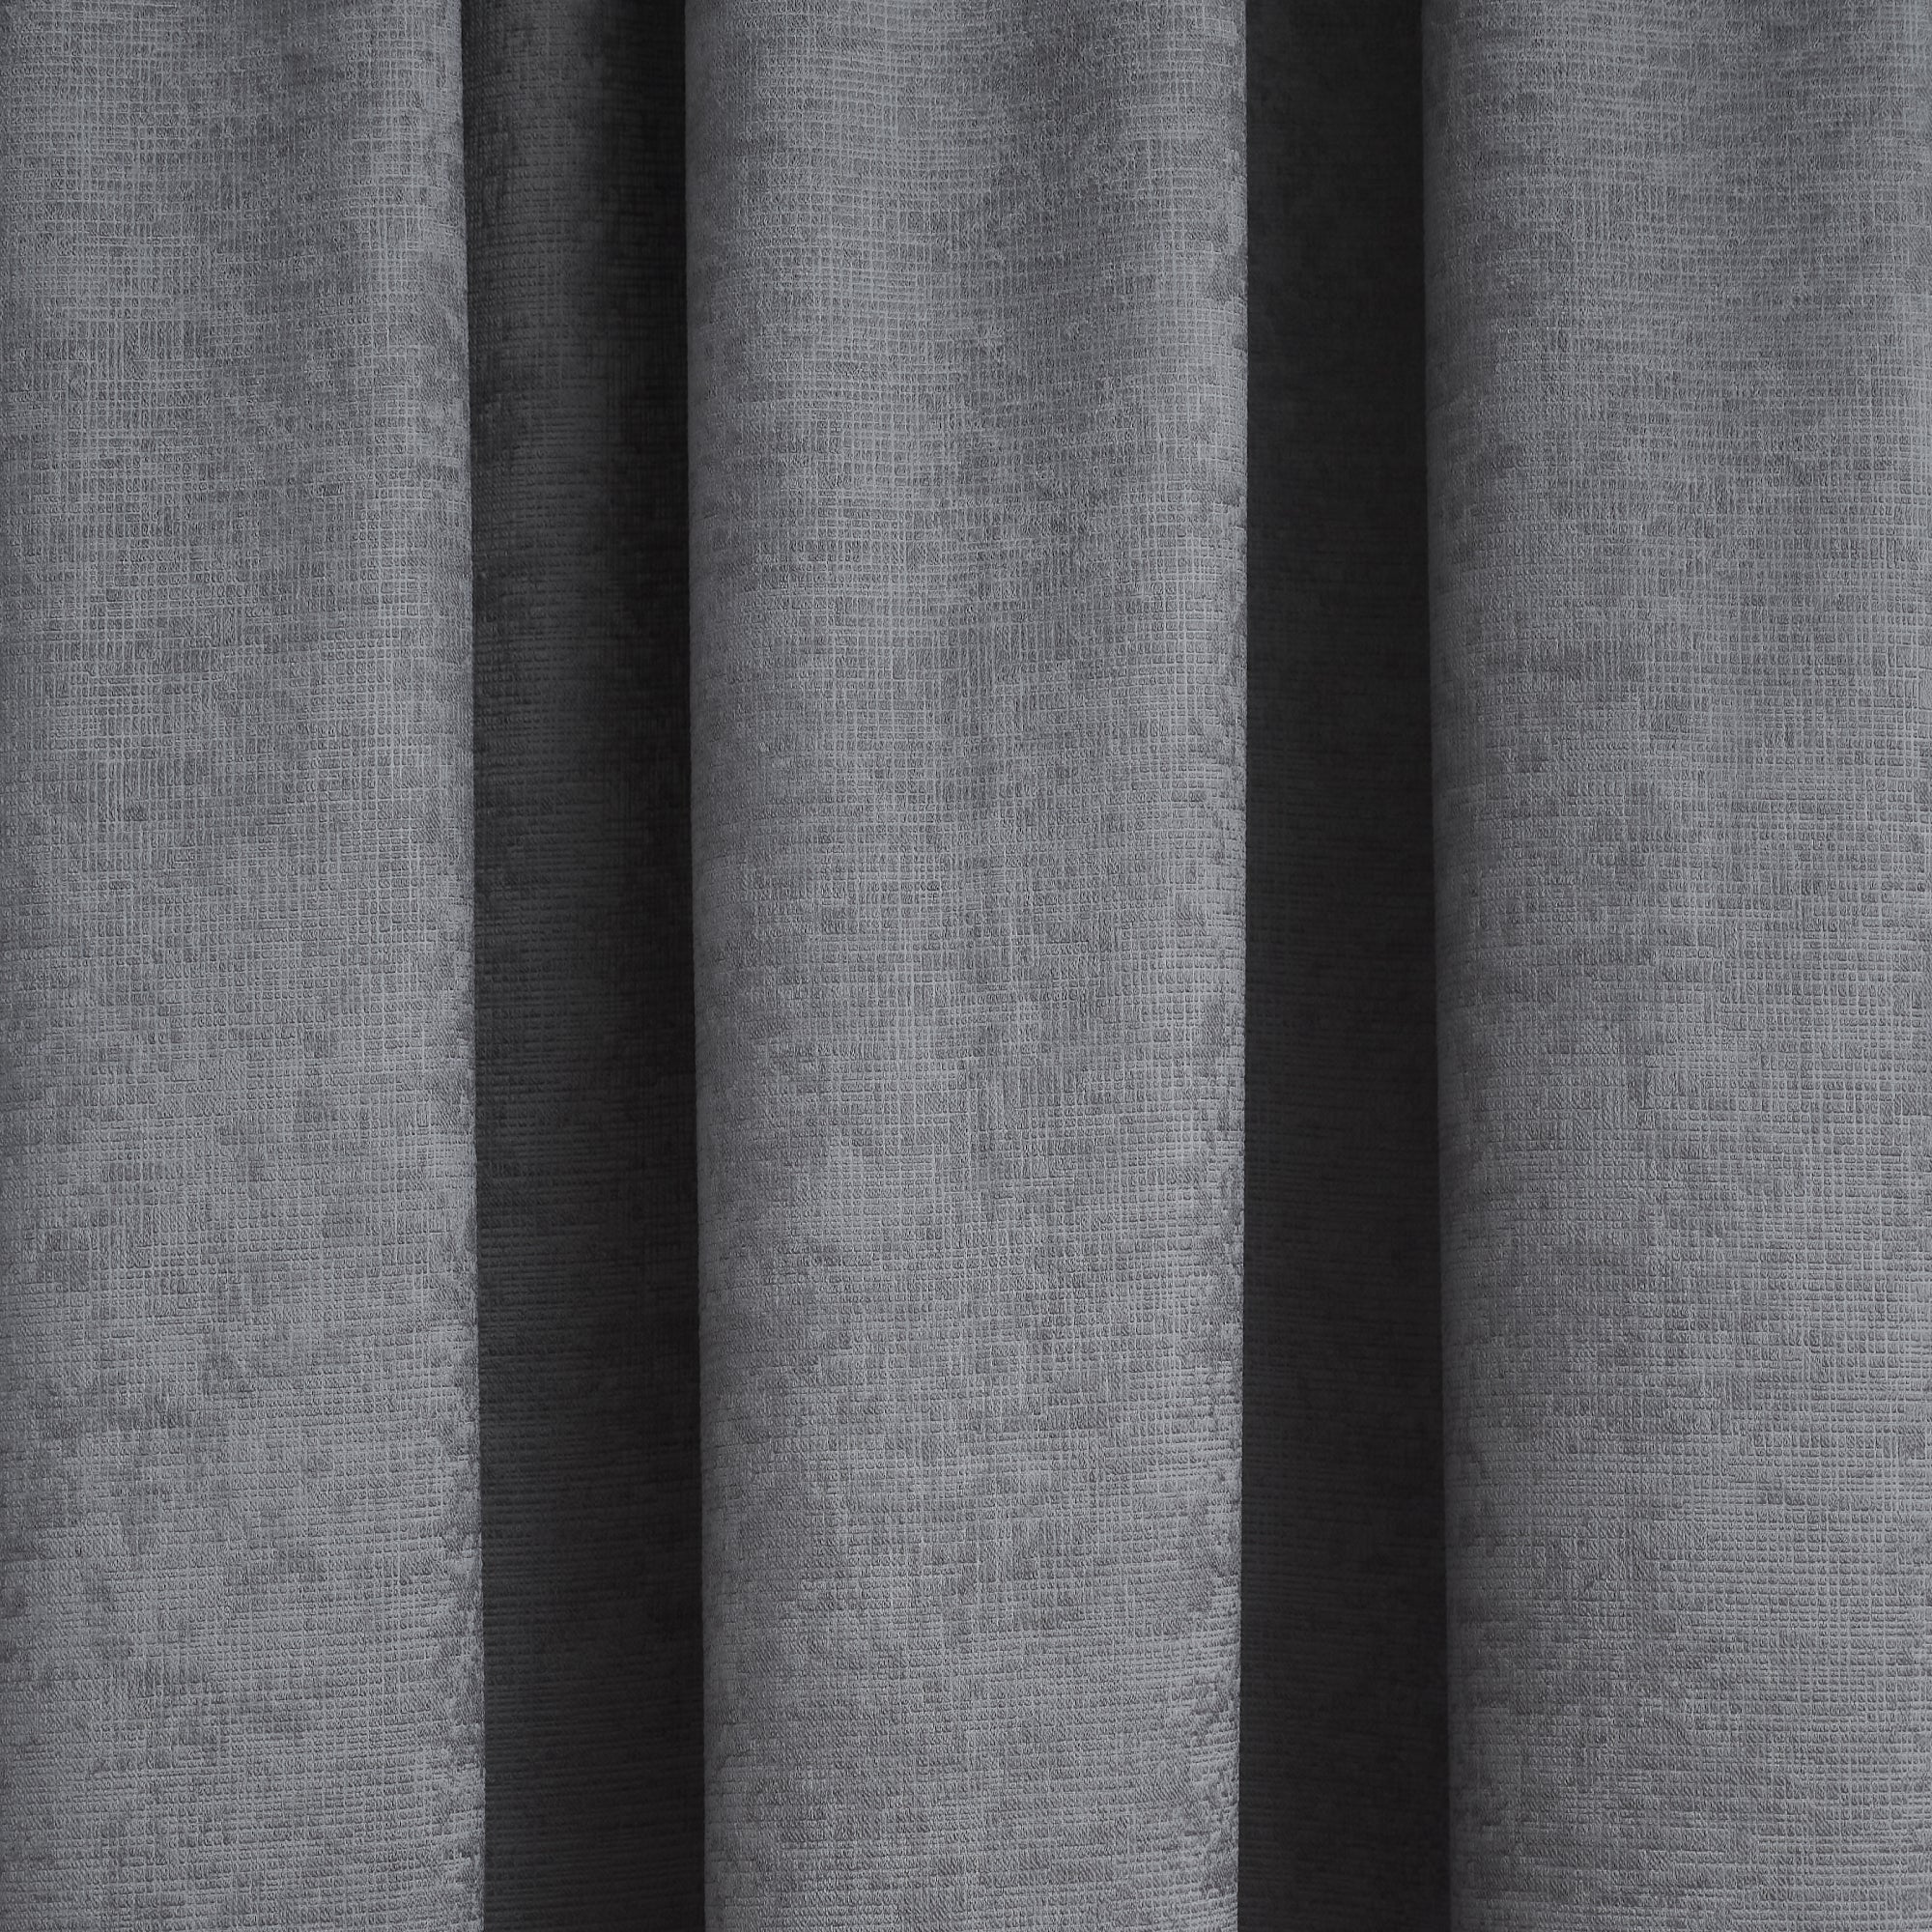 Pair of Pencil Pleat Curtains Galaxy by Fusion in Charcoal